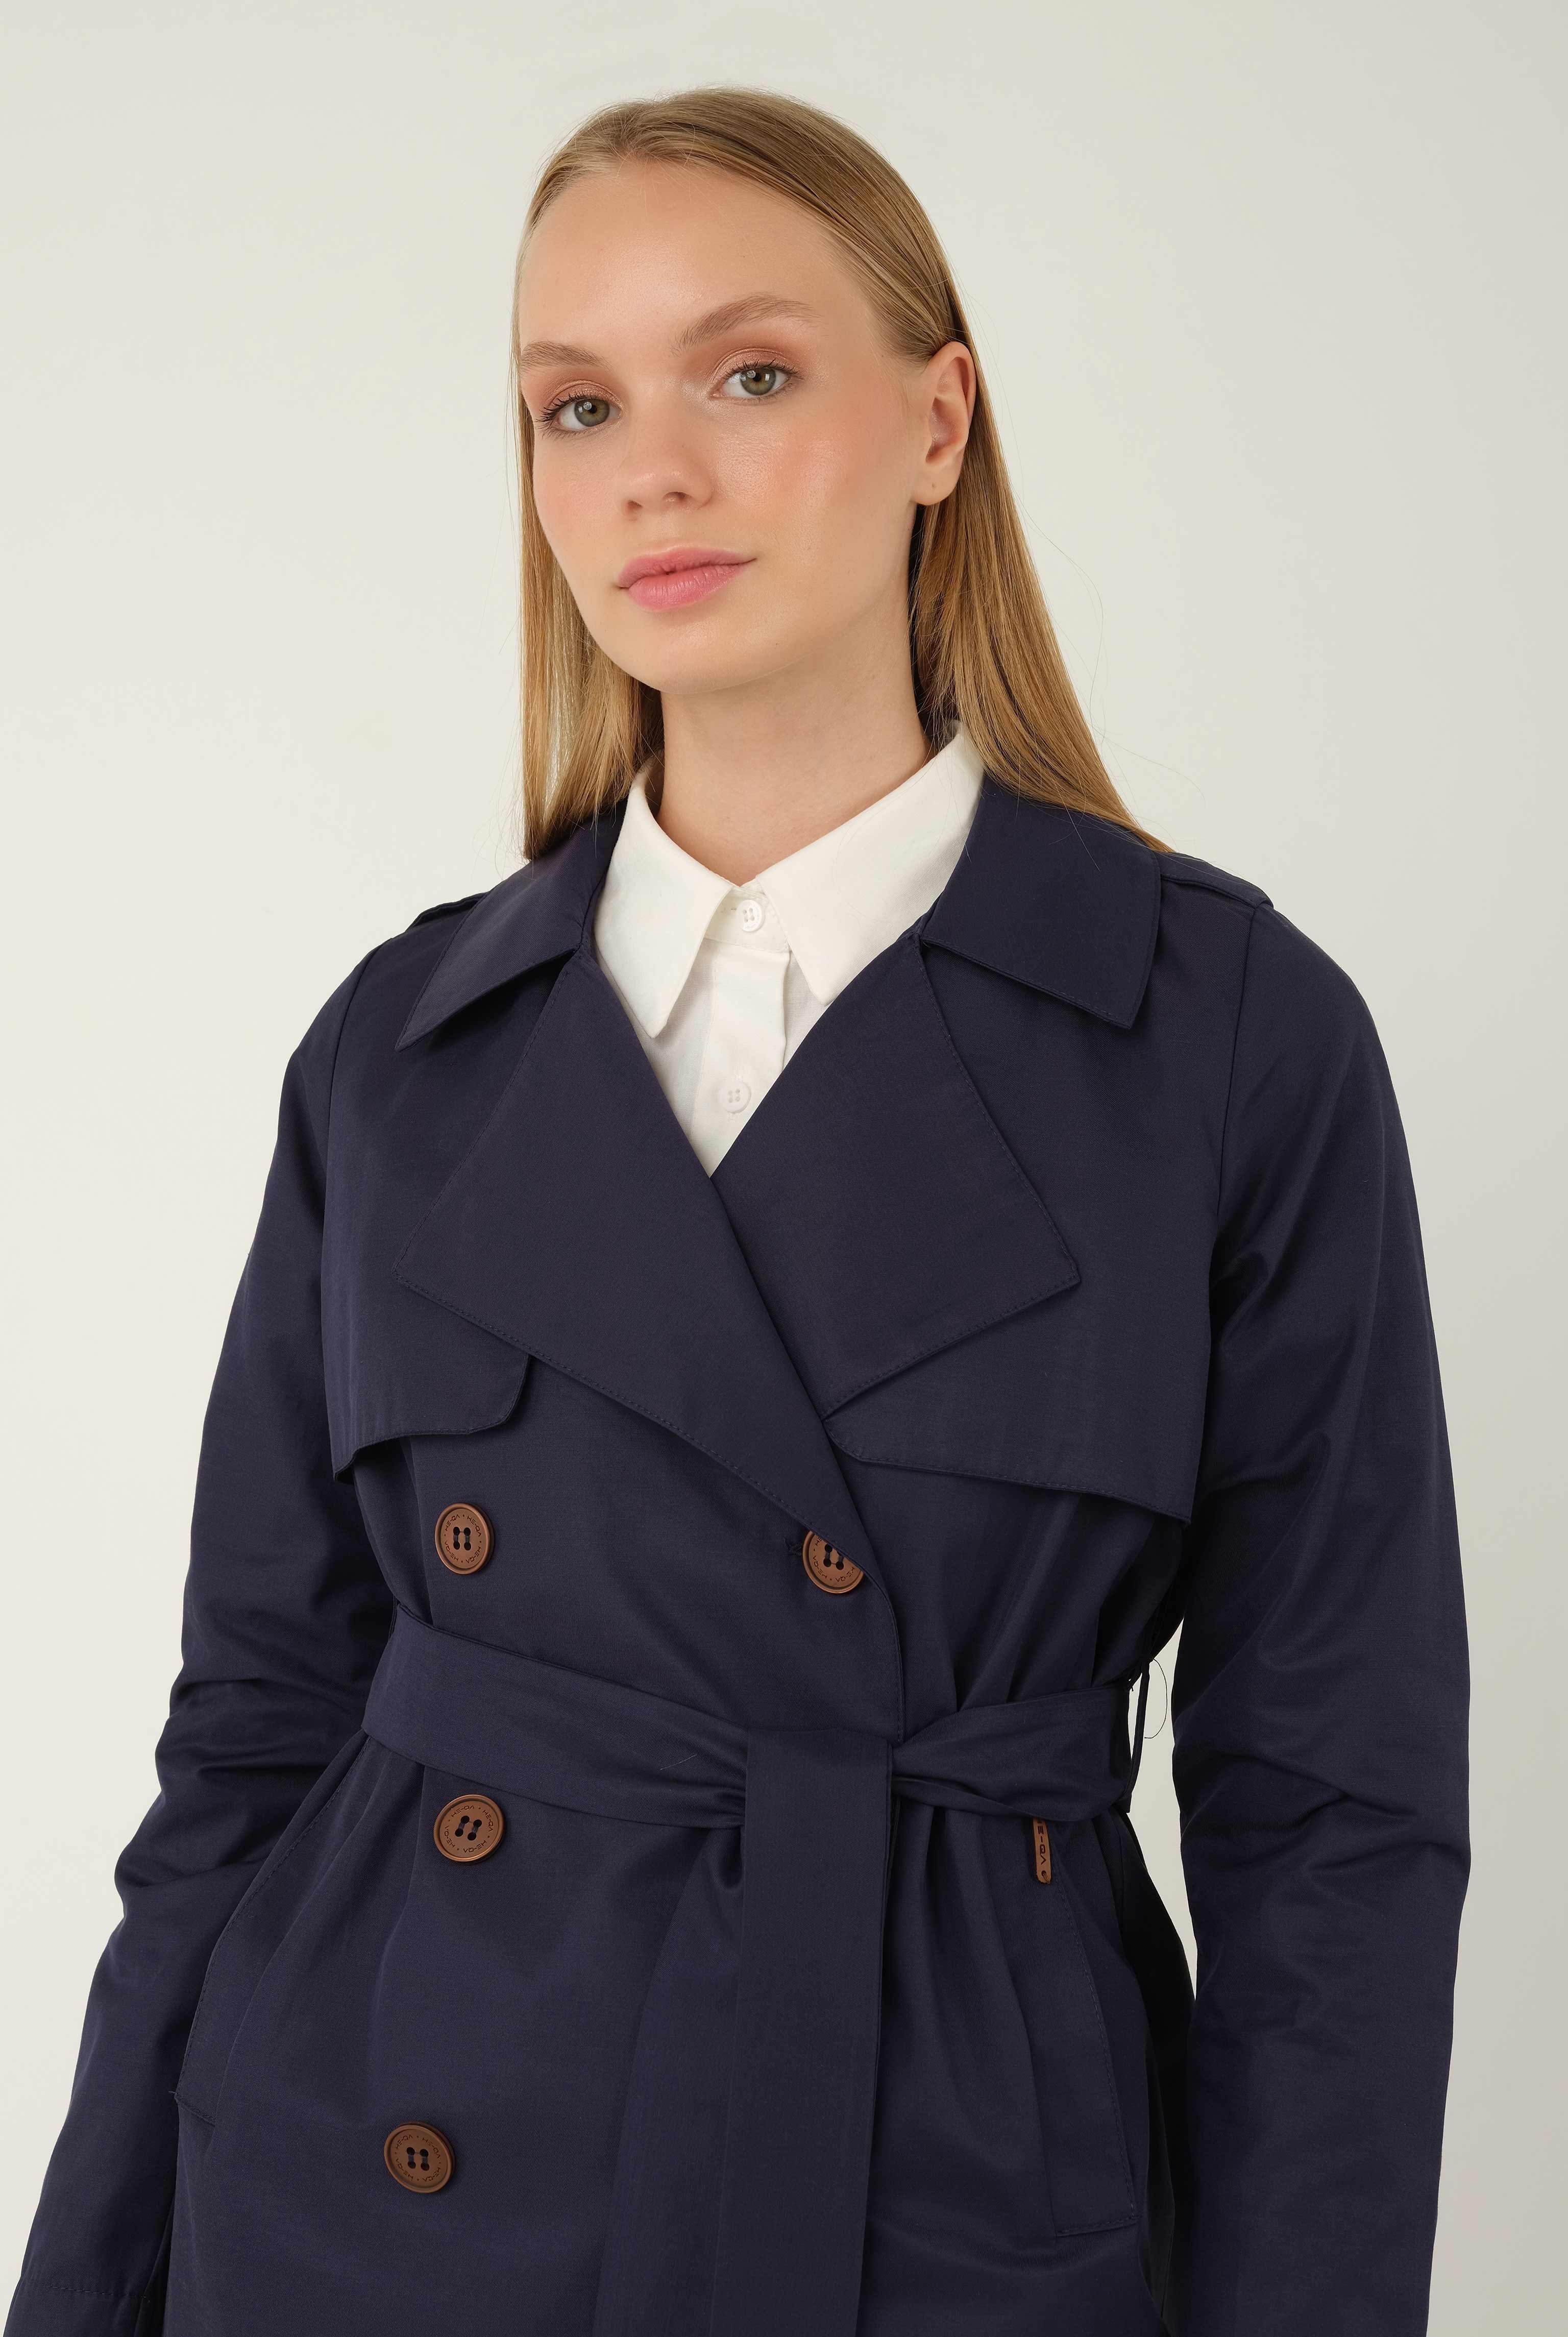 Past Trench Coat Navy Blue 